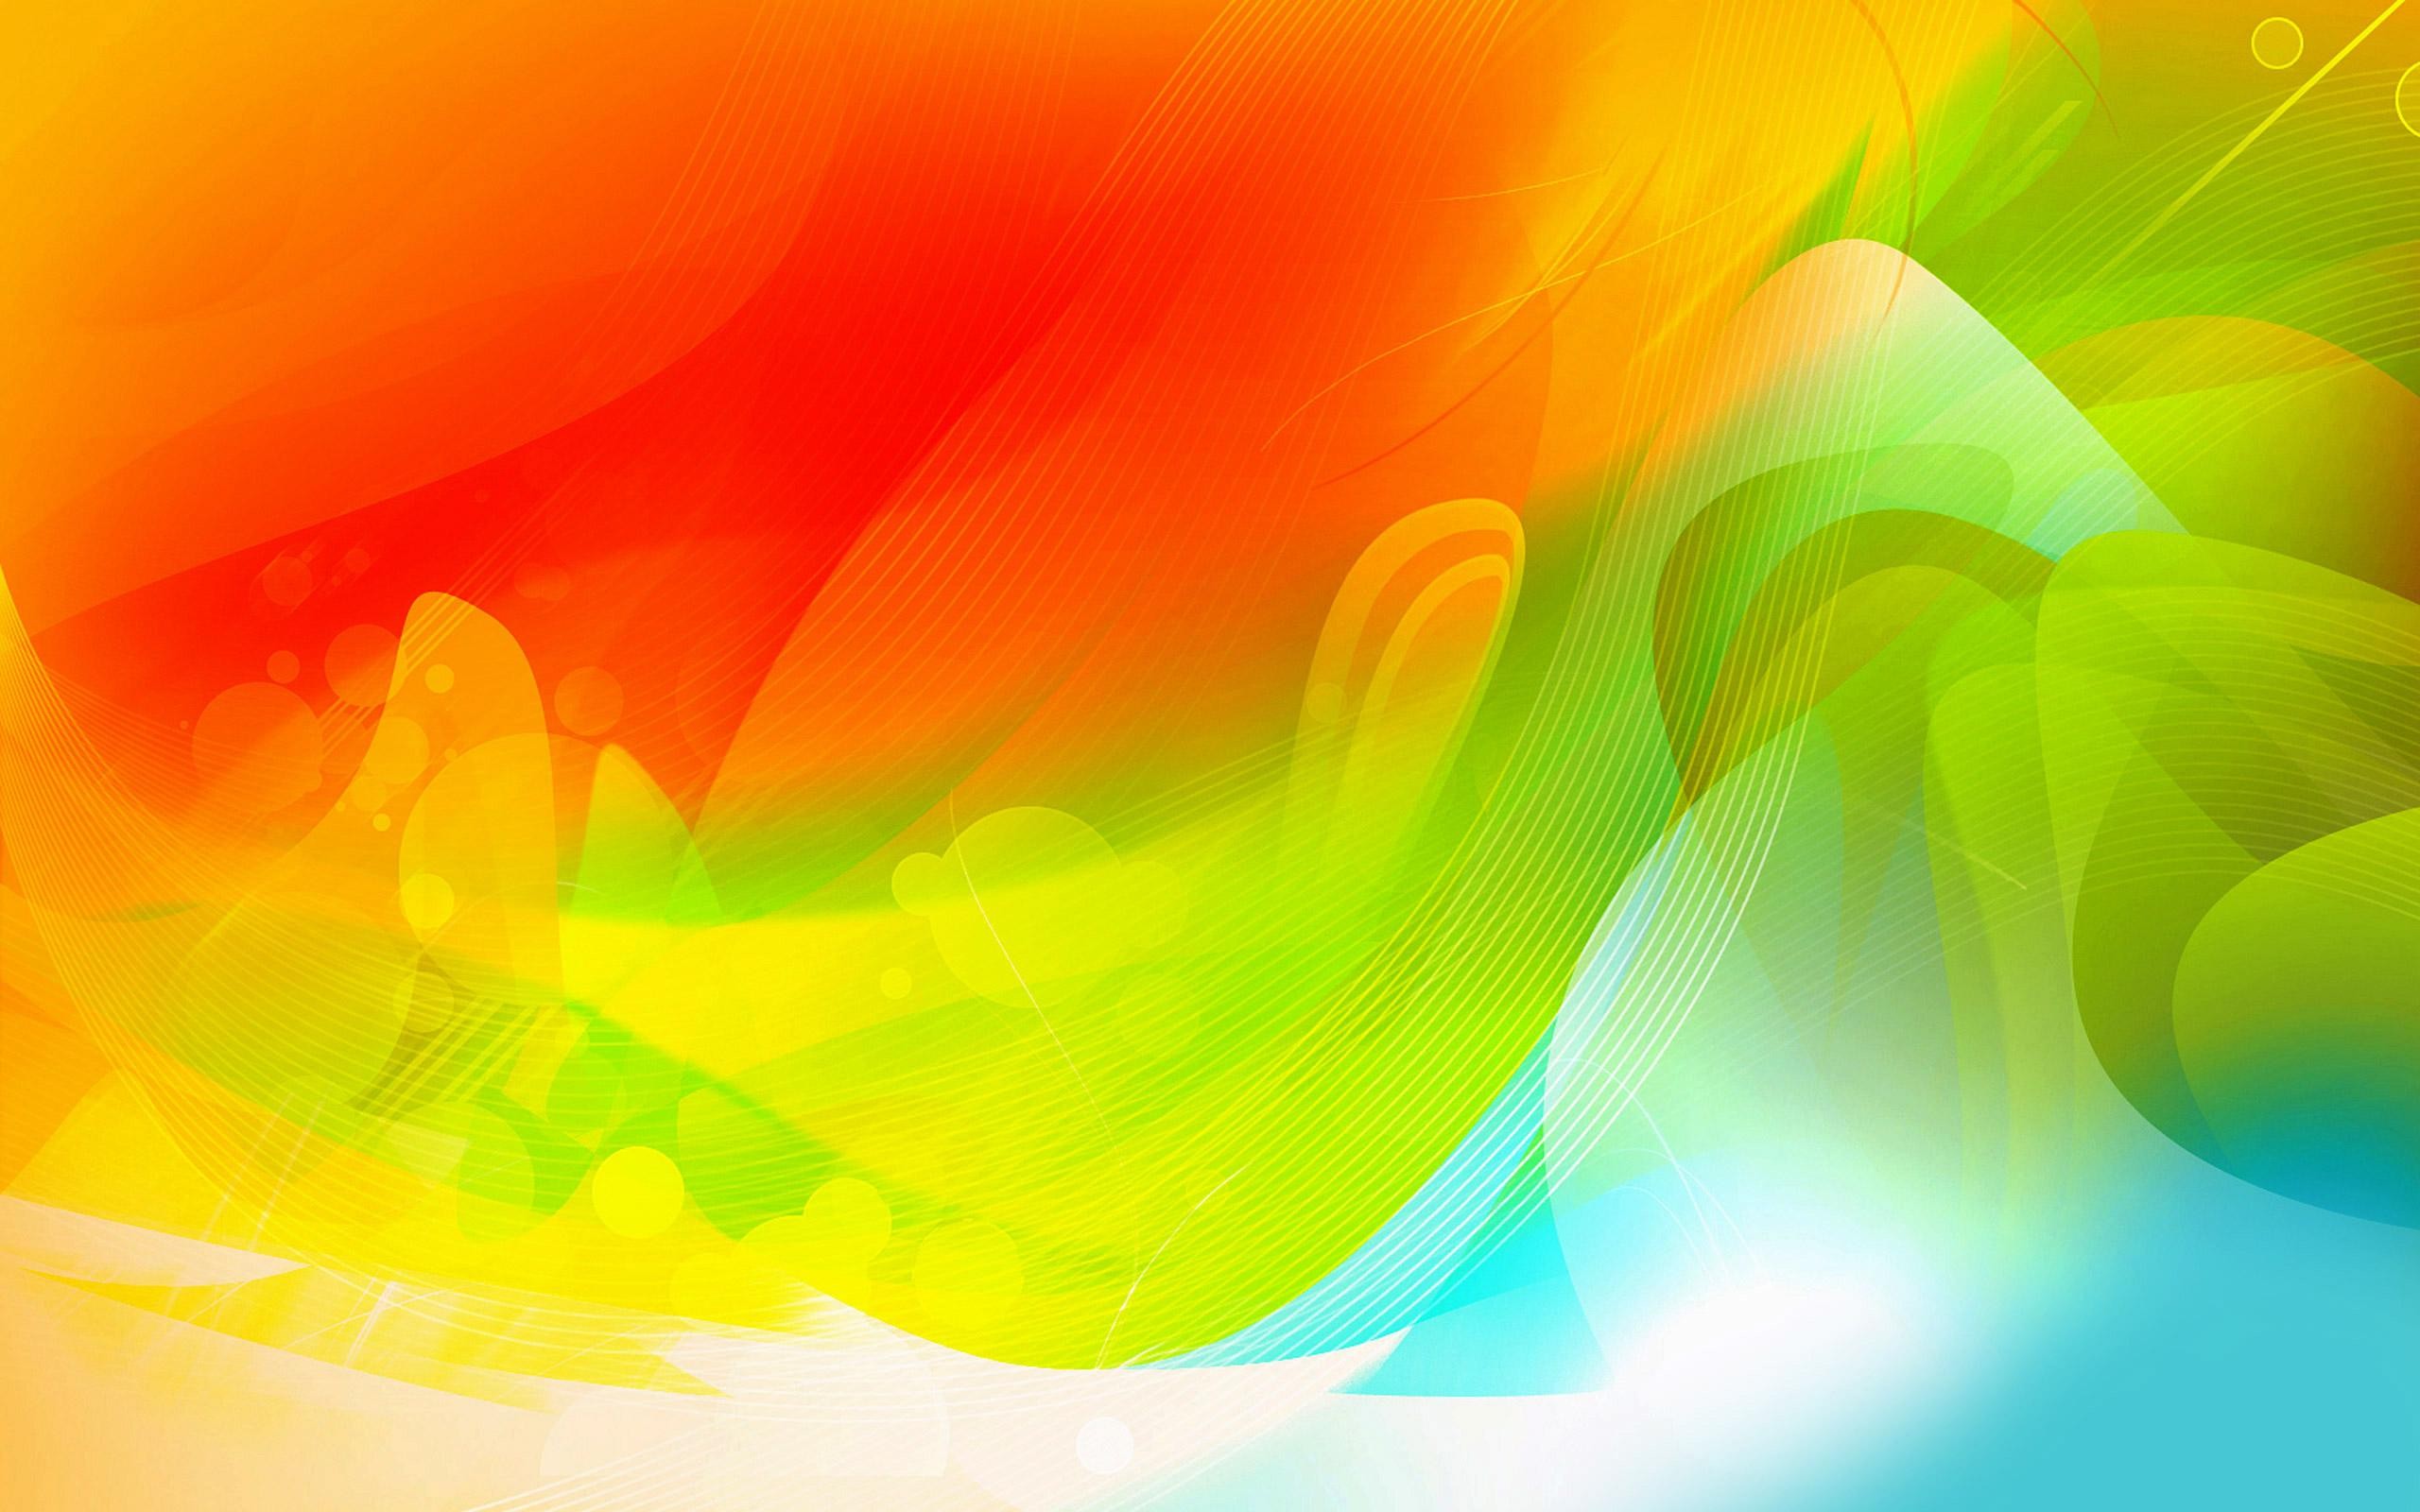 Colorful Background wallpaper 1920x1200 65923